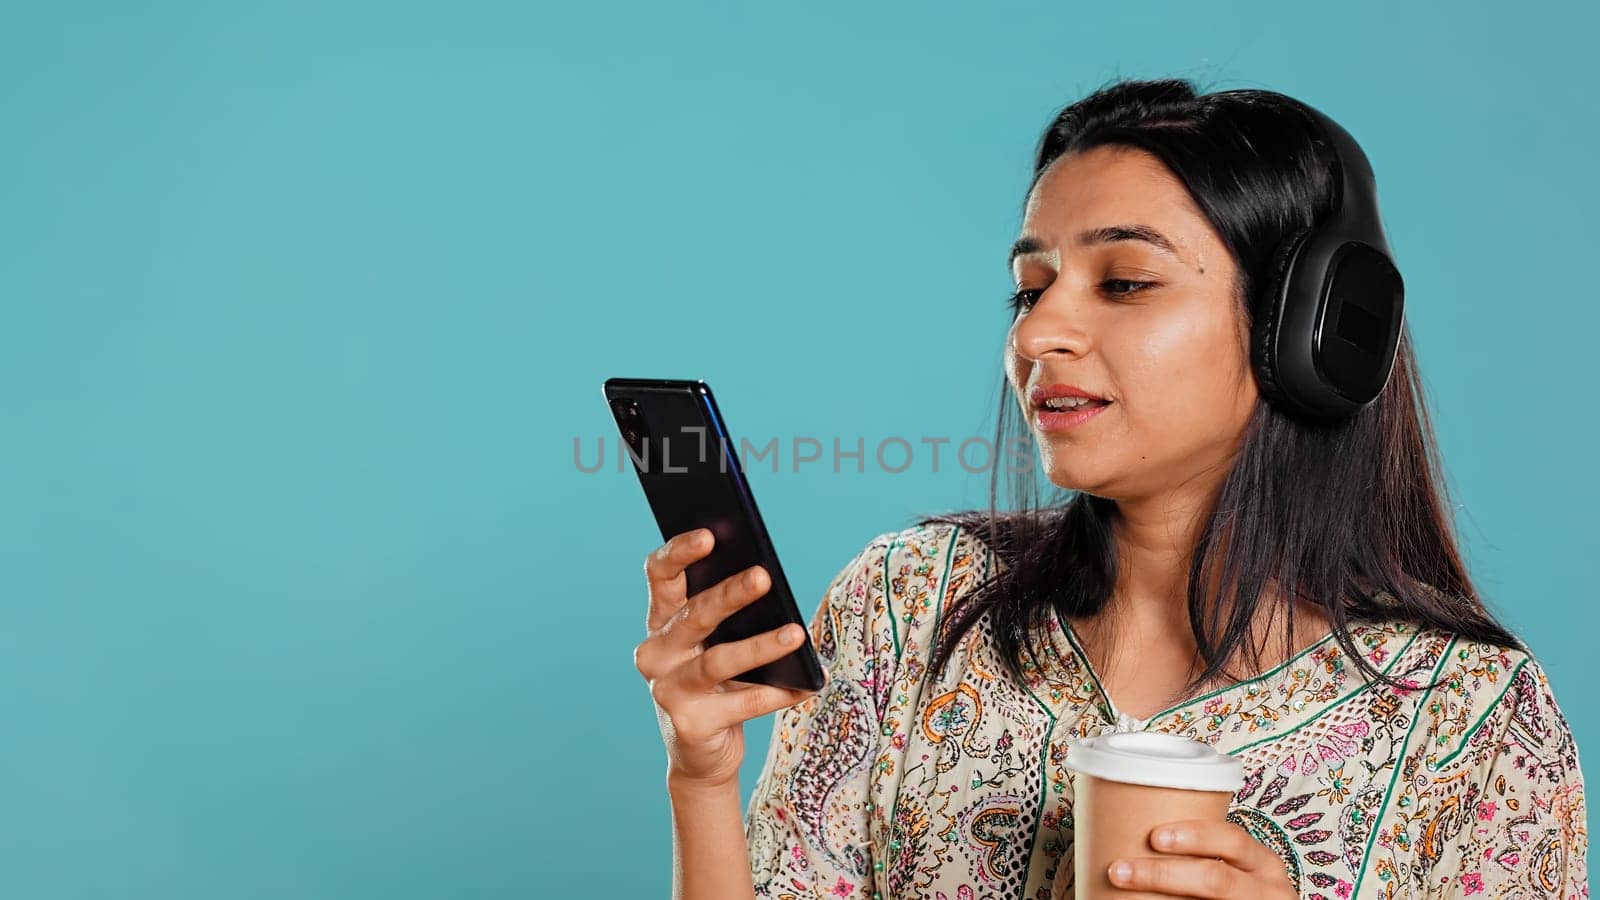 Joyous woman listening music, singing lyrics from phone screen, enjoying beverage. Cheerful person wearing headphones, listening songs, head bopping and holding coffee cup, studio background, camera B